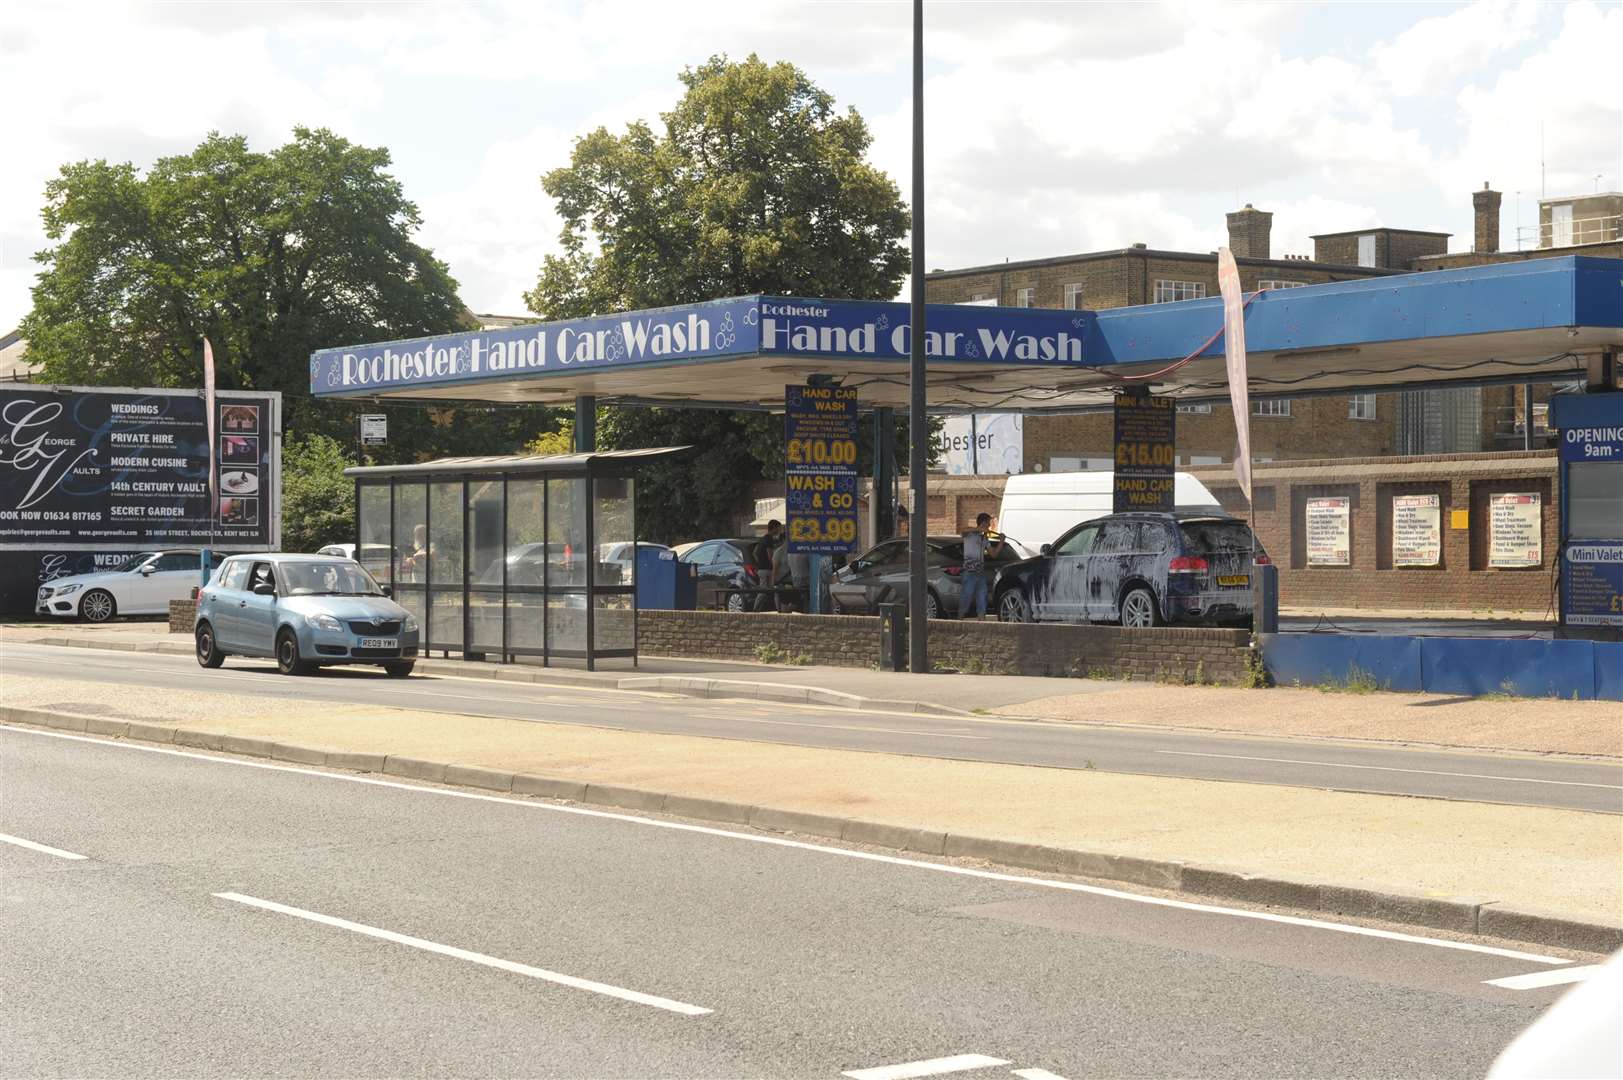 The new hotel will be at the site of a currently unused car wash in Corporation Street, Rochester